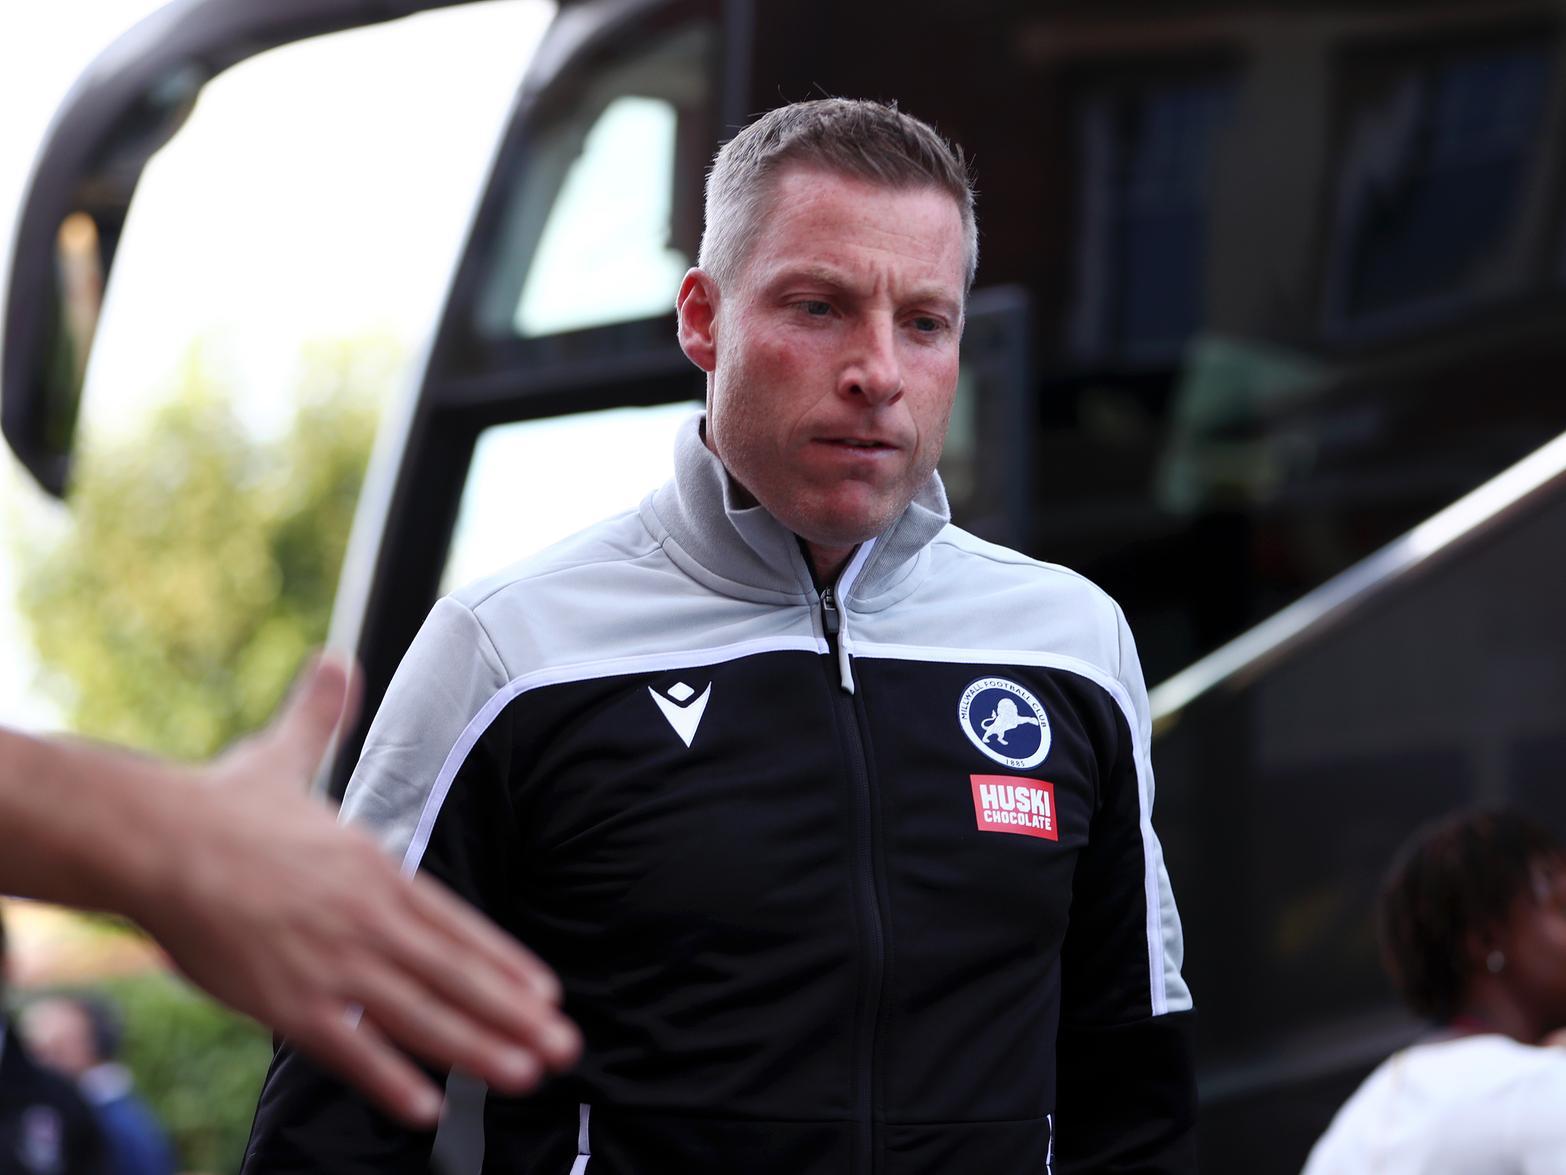 The former Millwall manager took charge of more than 240 games for the Lions before leaving last month.